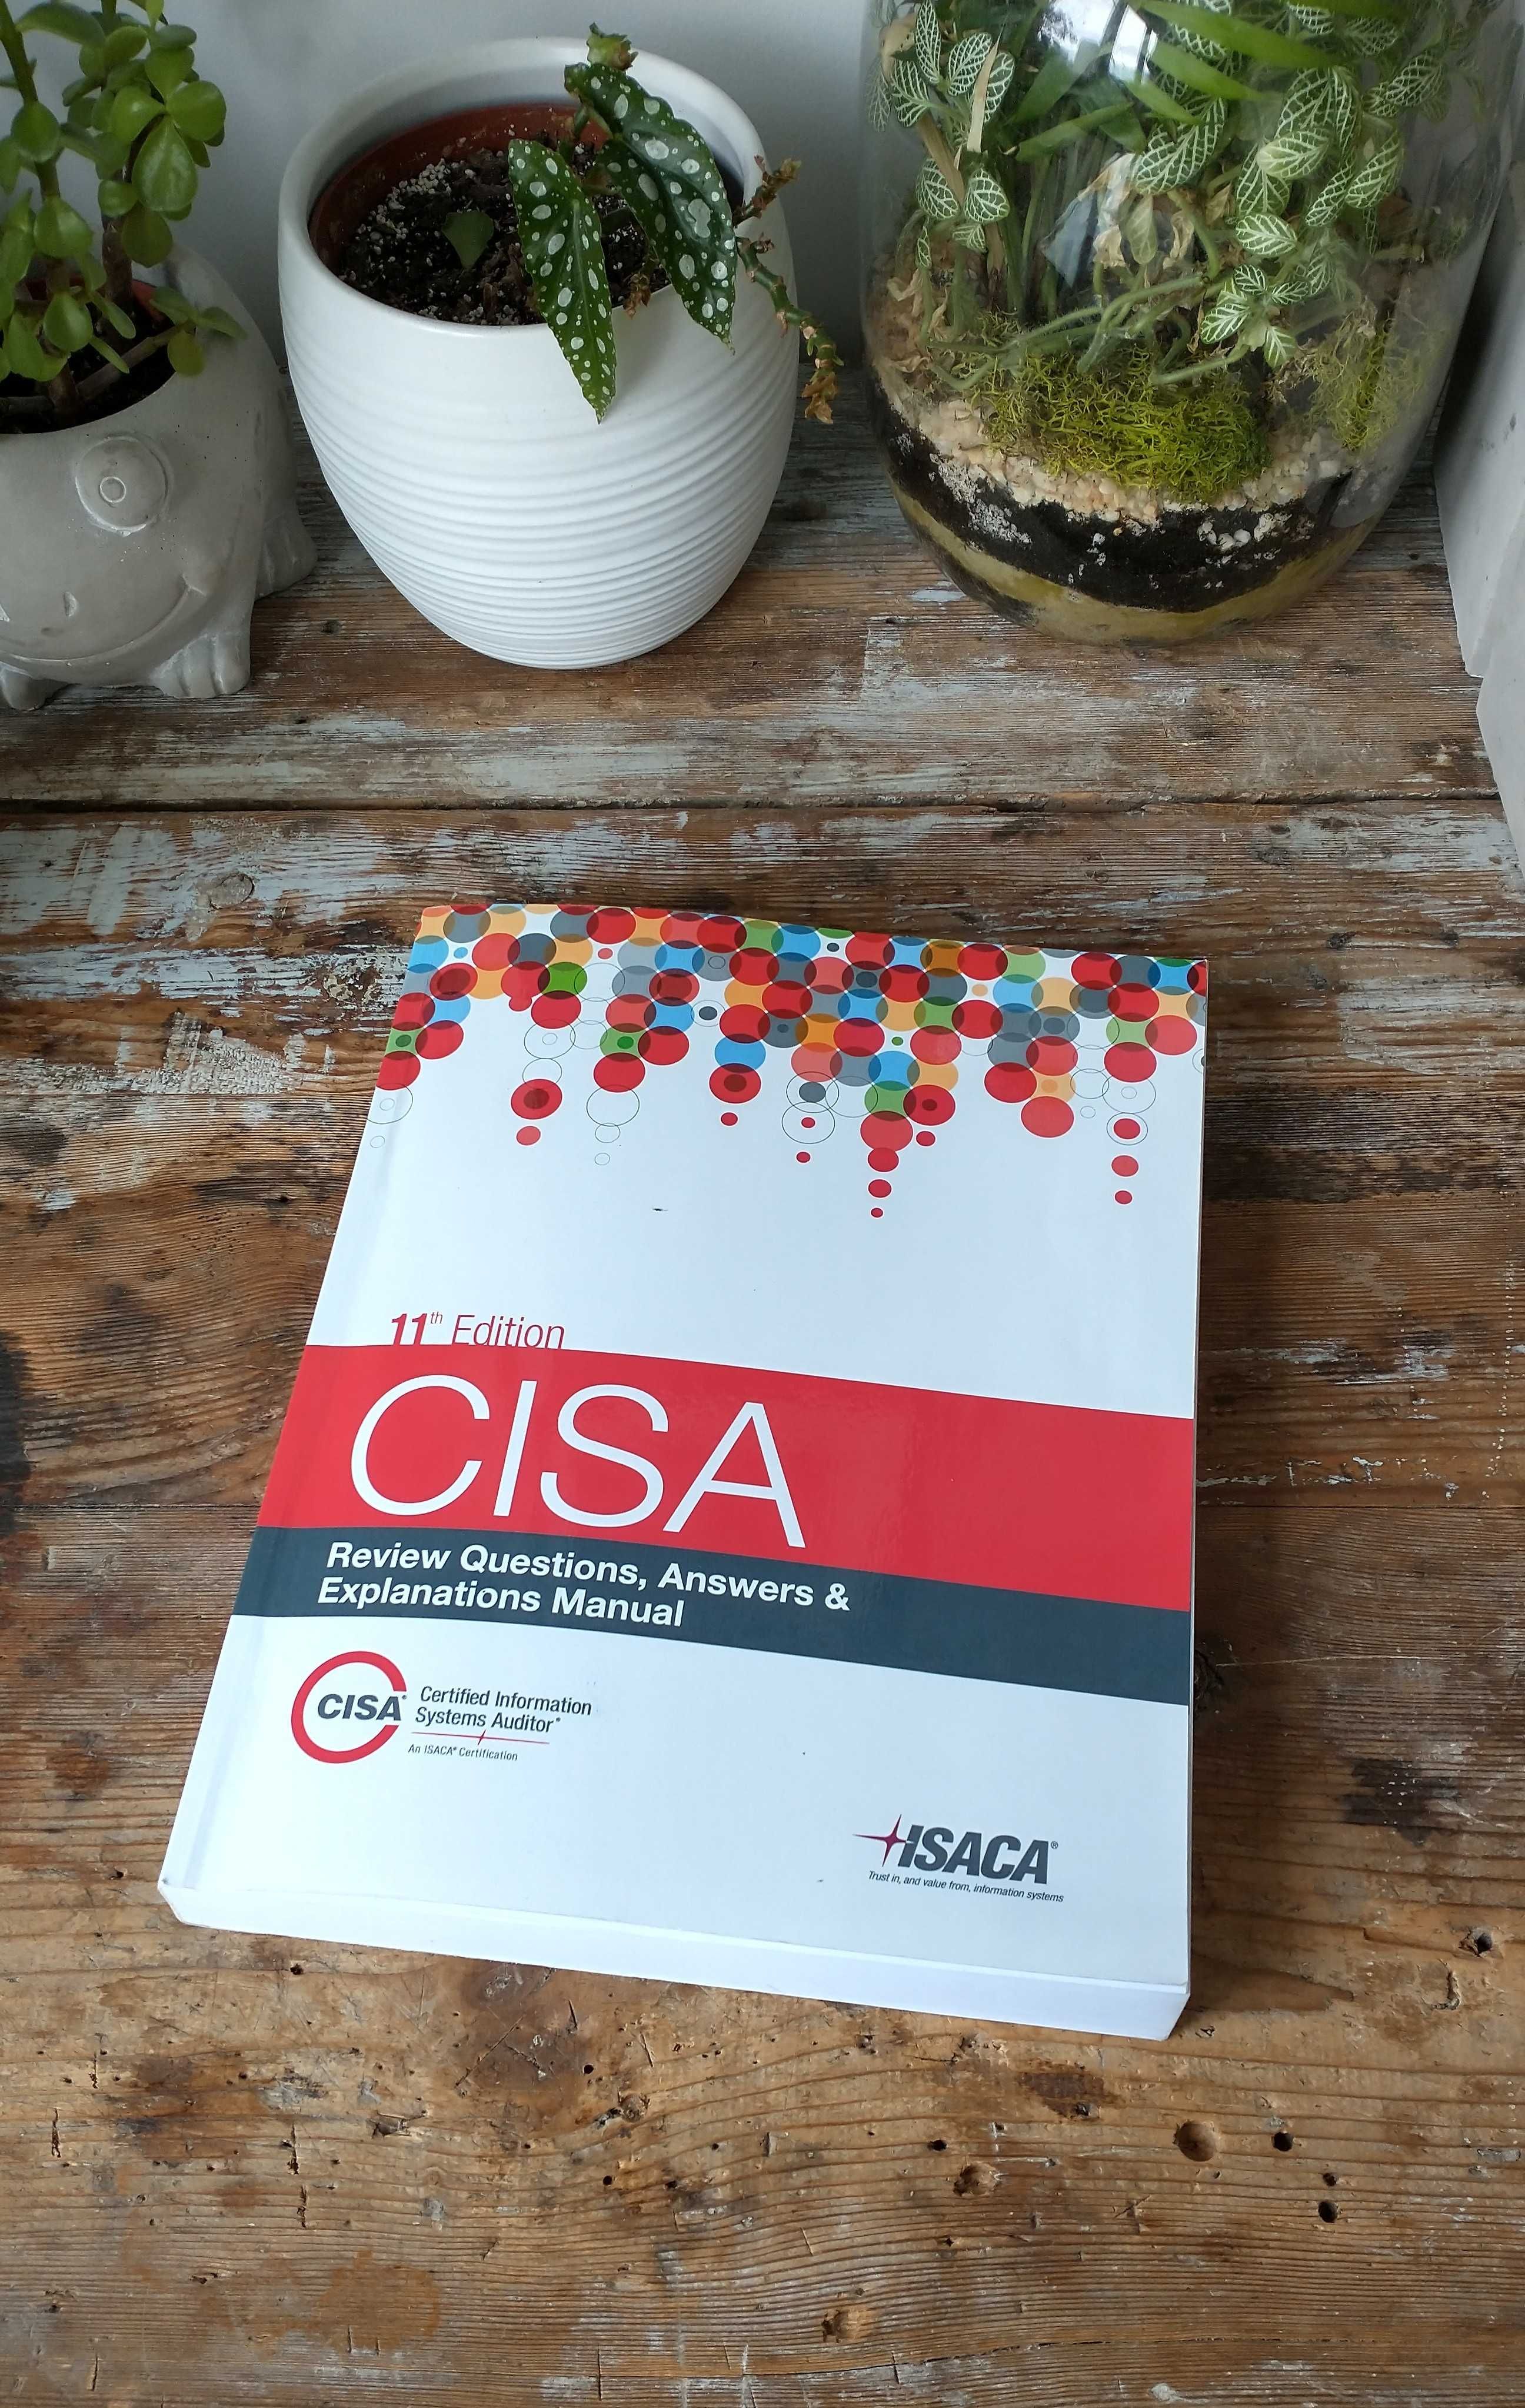 CISA Review Questions, Answers & Explanations Manual 11th Edition